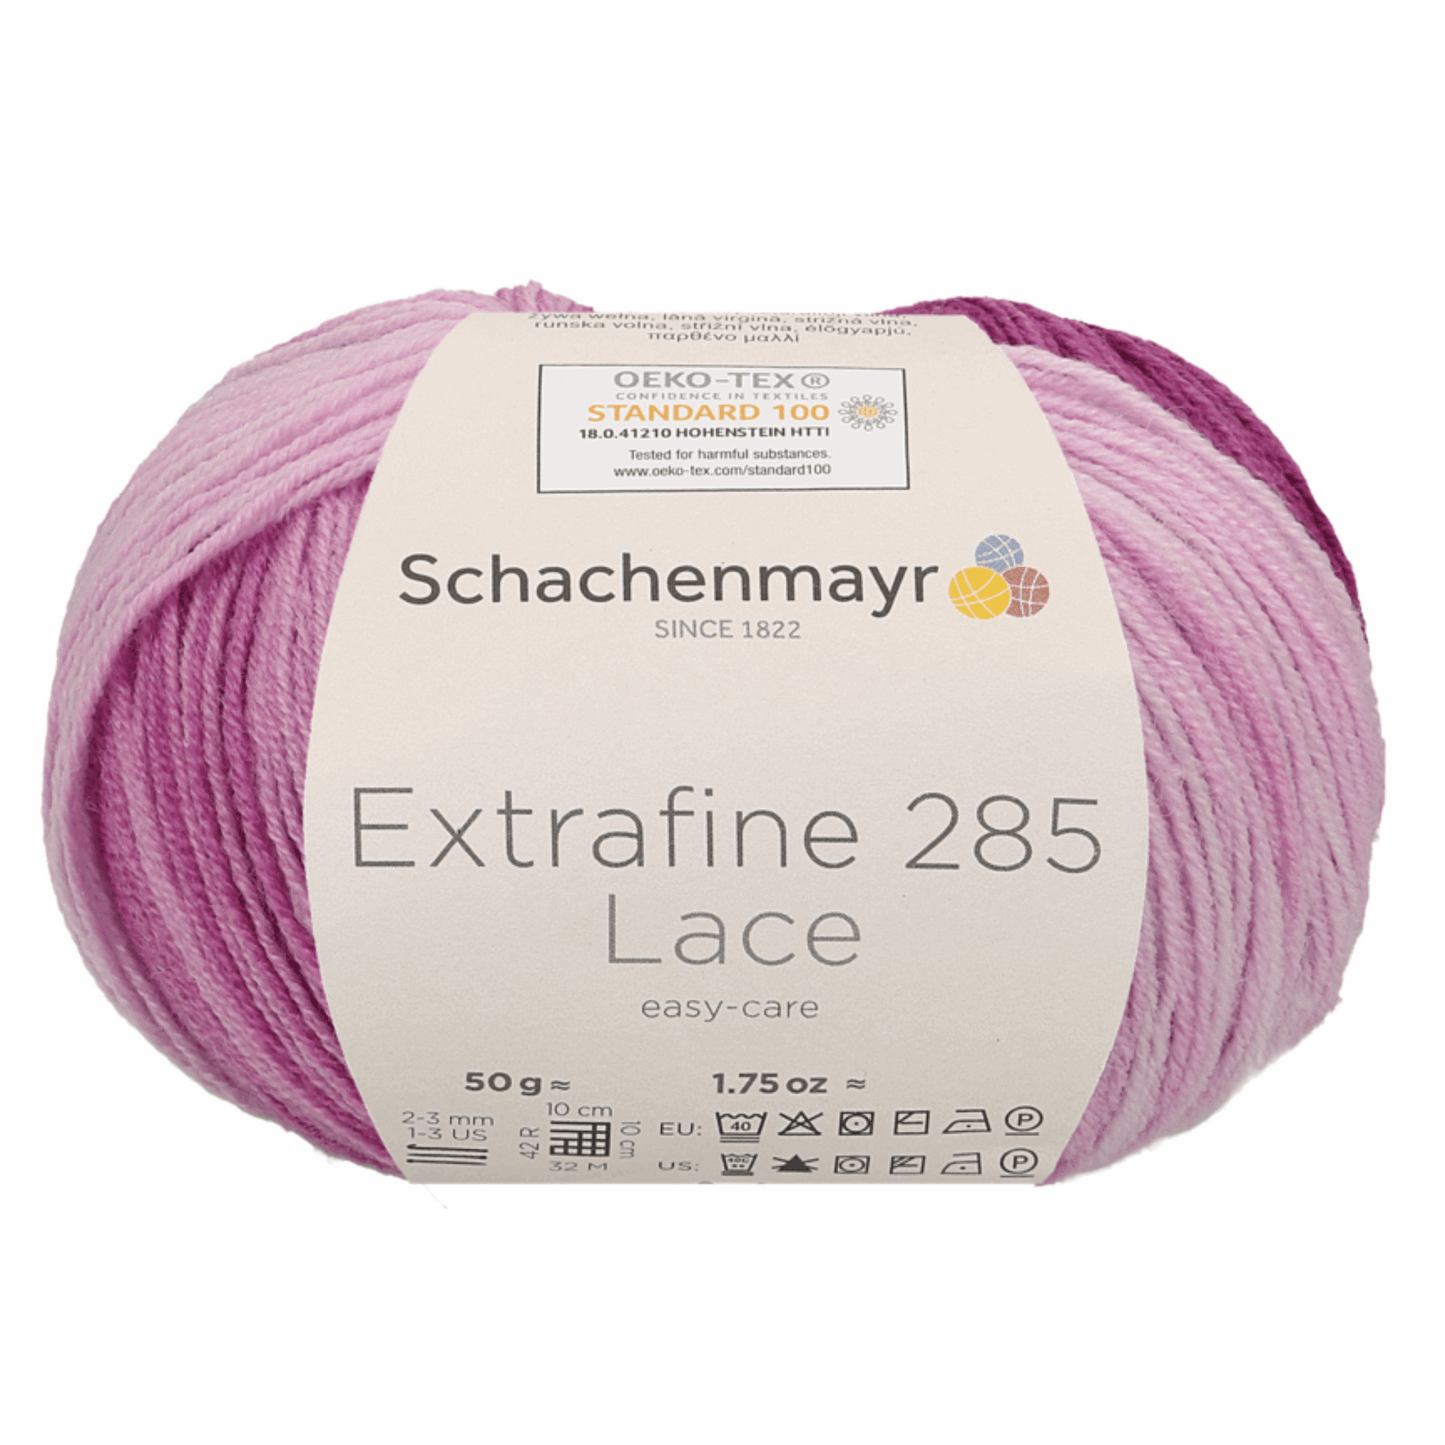 Schachenmayr Merino extrafine 285 Lace 50g, 90574, Farbe orchid 603